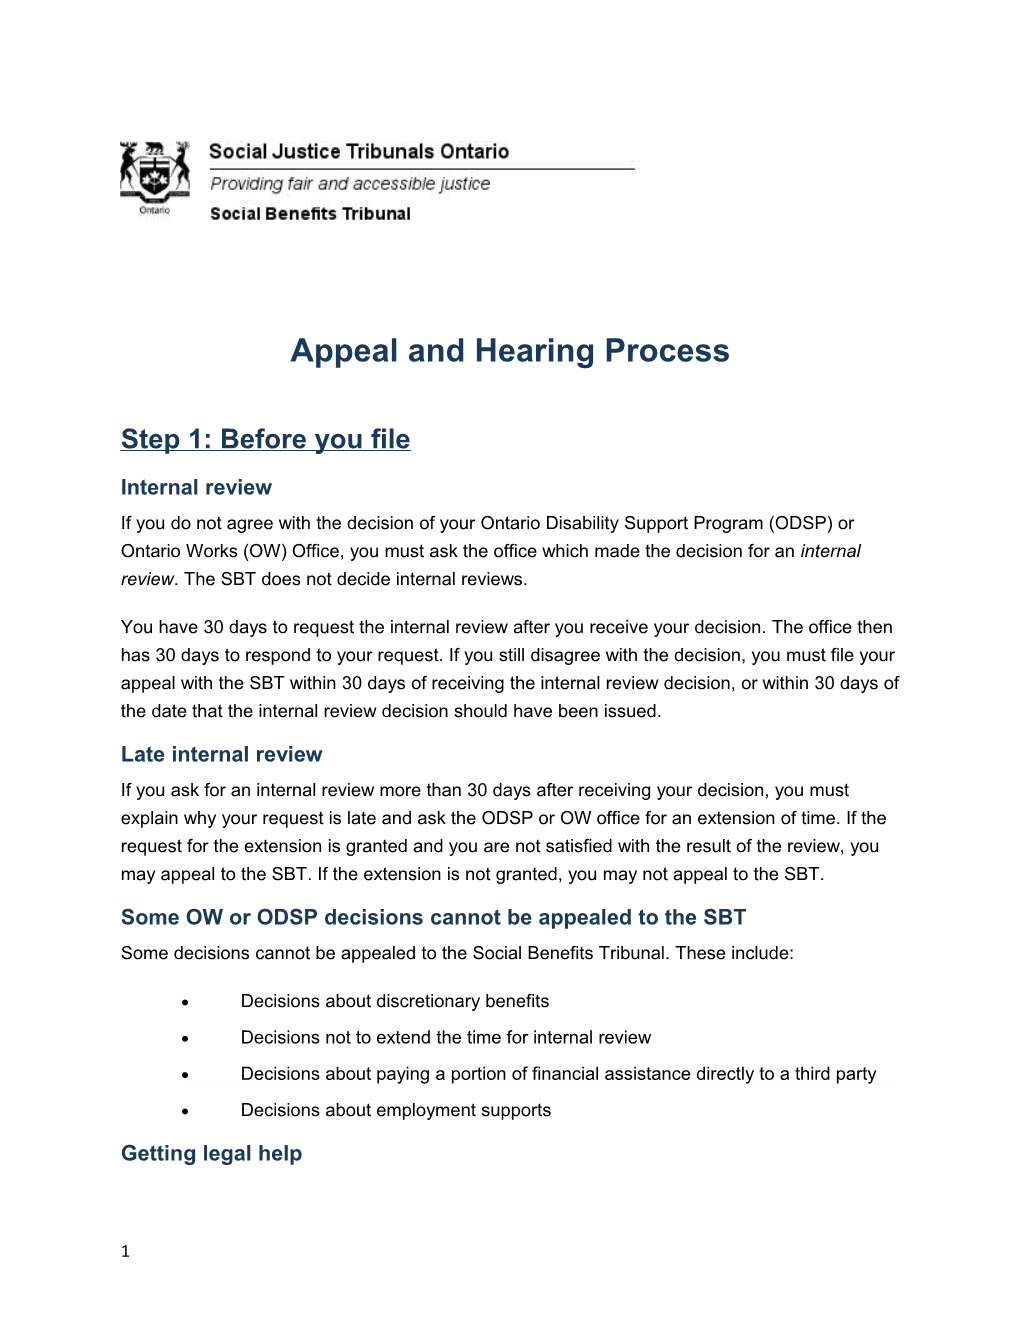 Appeal and Hearing Process